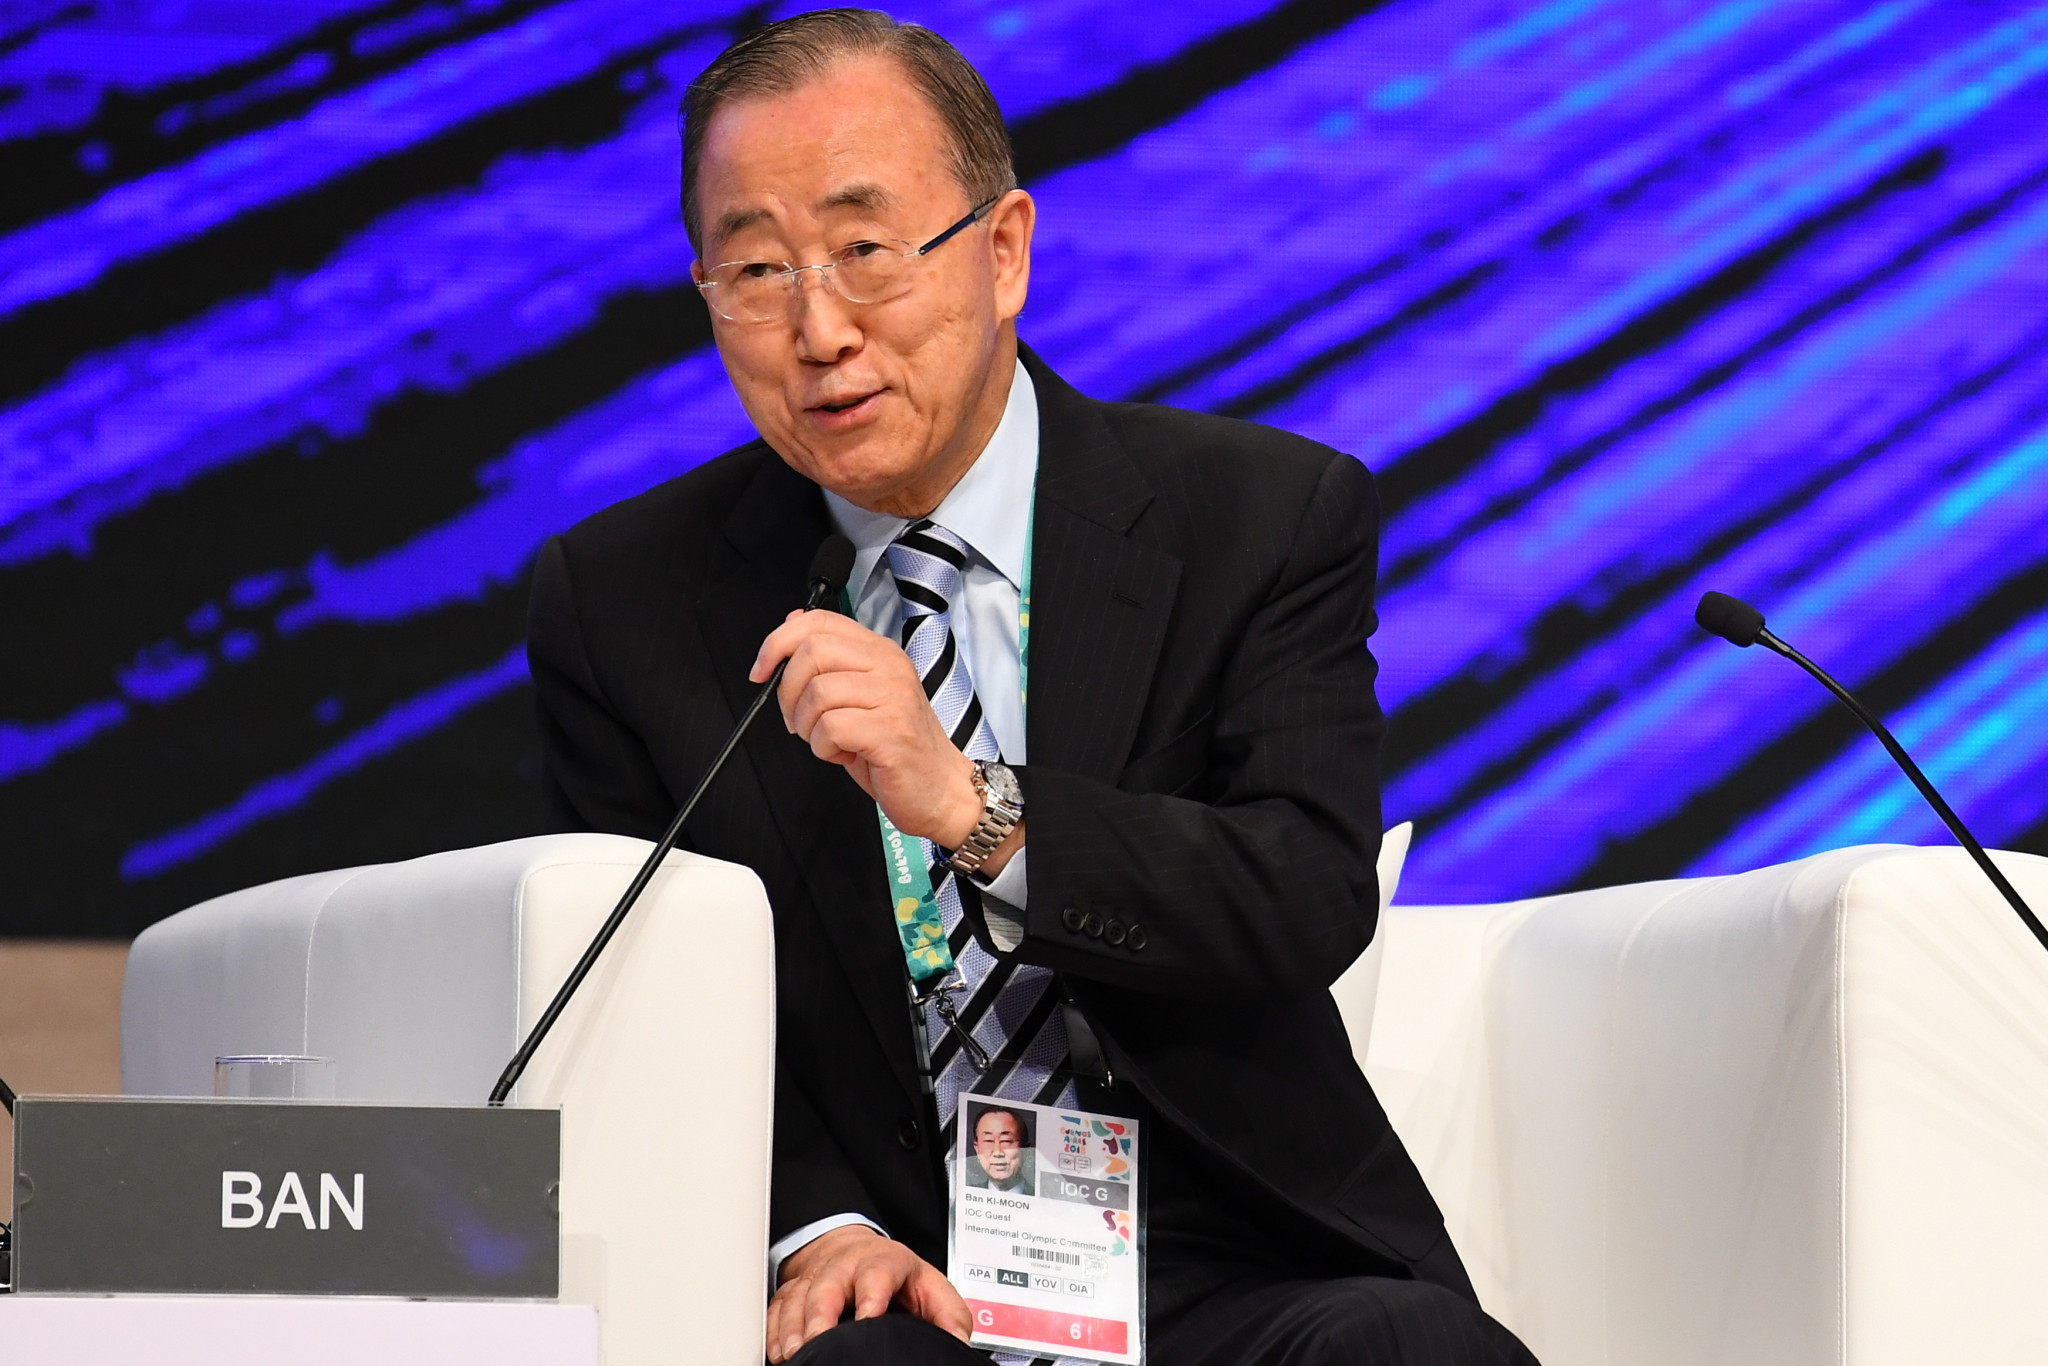 Former UN Secretary General Ban Ki-Moon was named as the independent IOC Ethics Commission chair last September ©Getty Images